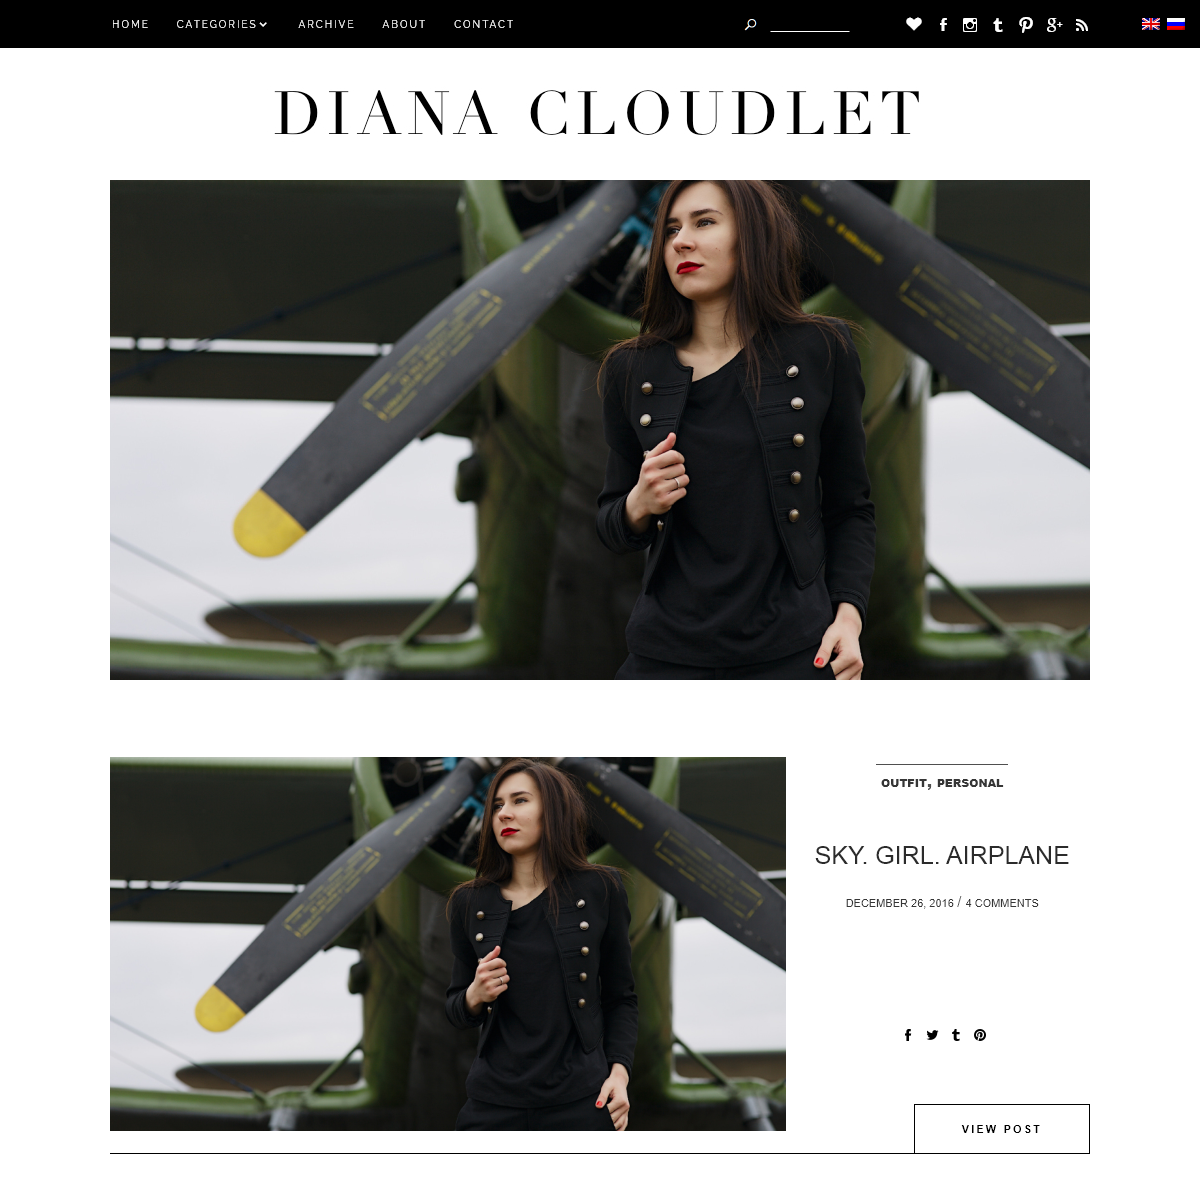 A complete backup of dianacloudlet.com